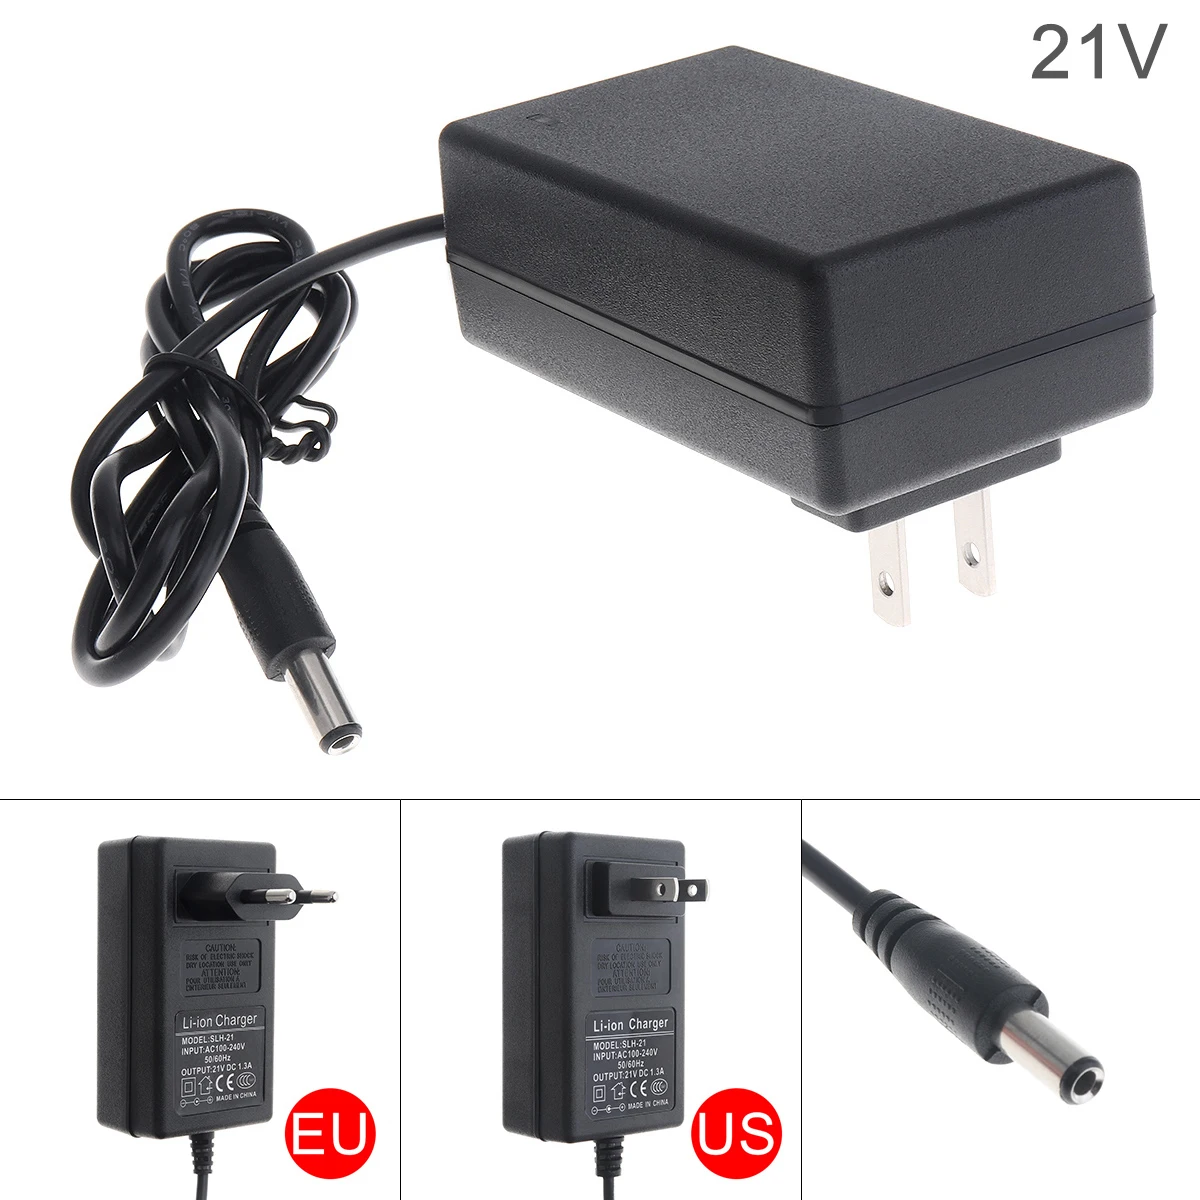 90cm 21V Power Adapter Charger with EU Plug and US Plug for Lithium Electric Drill / Screwdriver / Wrench Tool Accessories